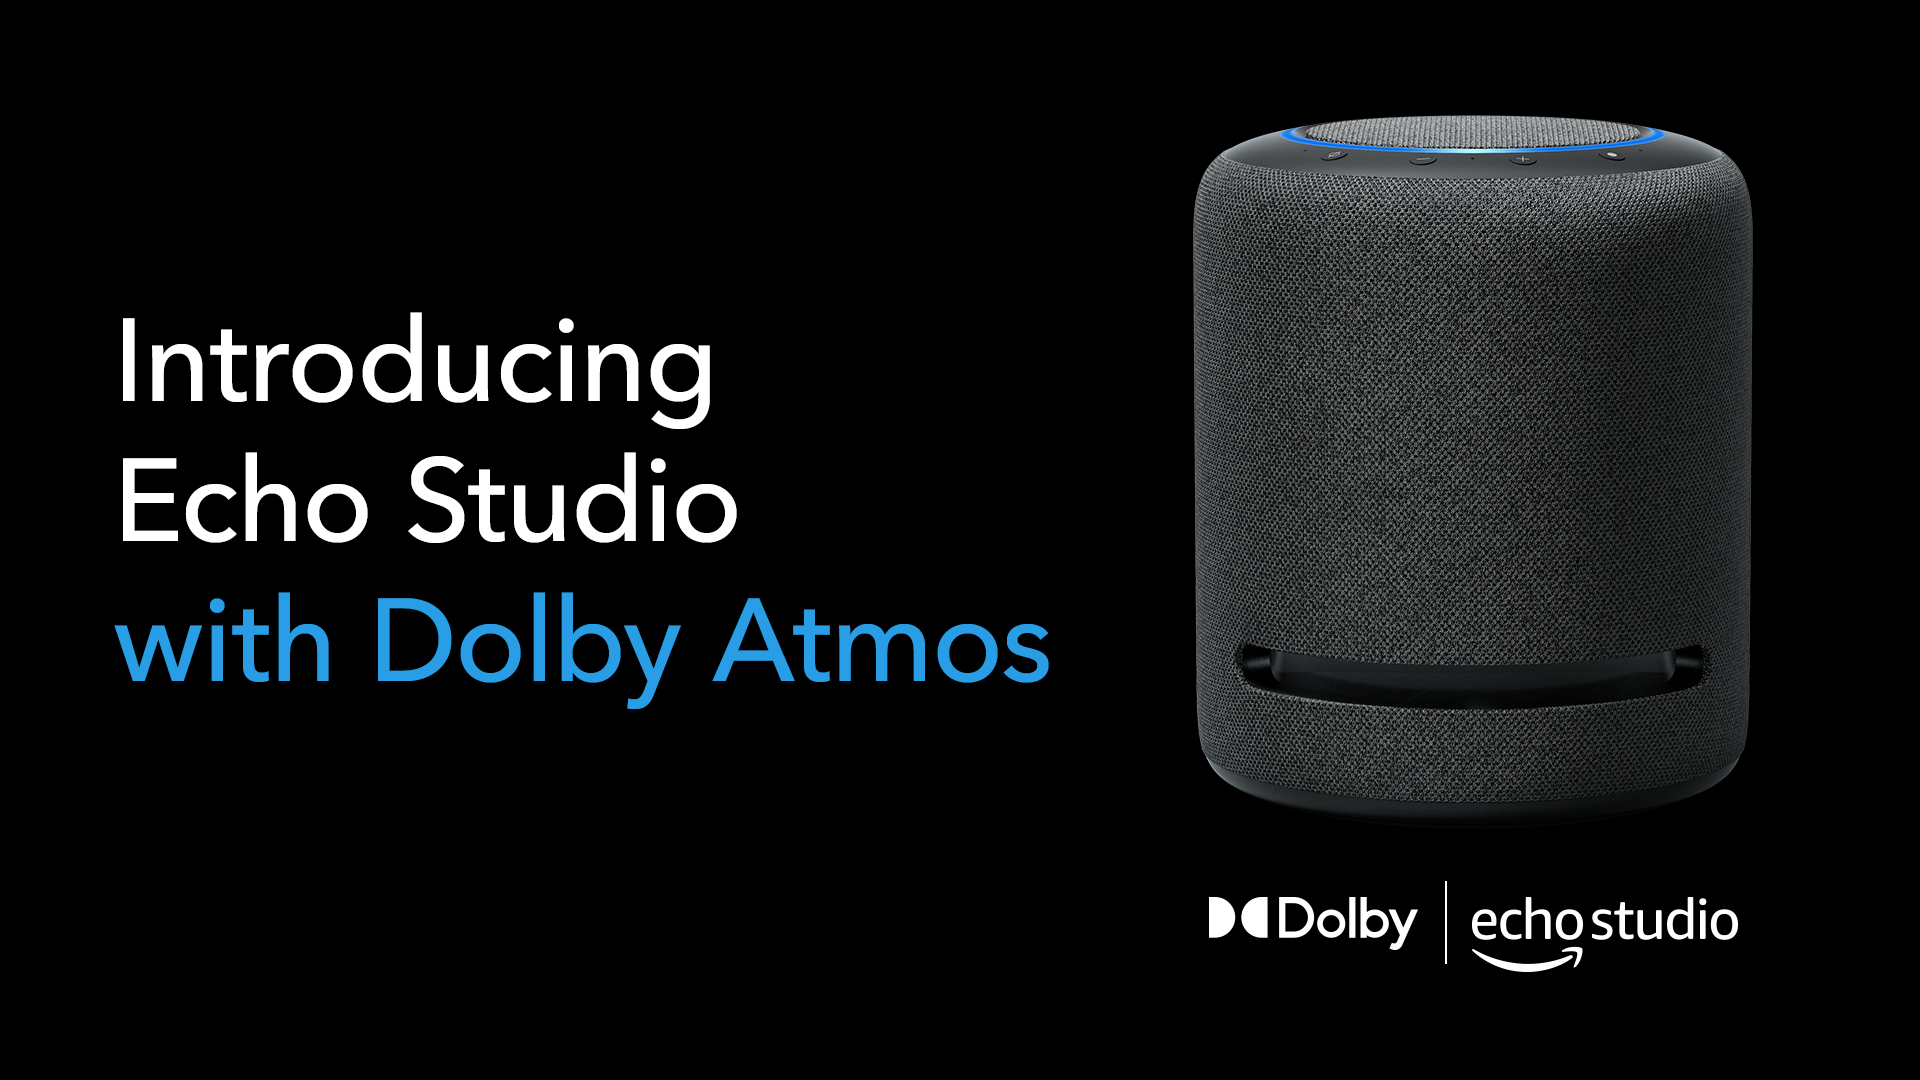 Echo Studio With Dolby Atmos